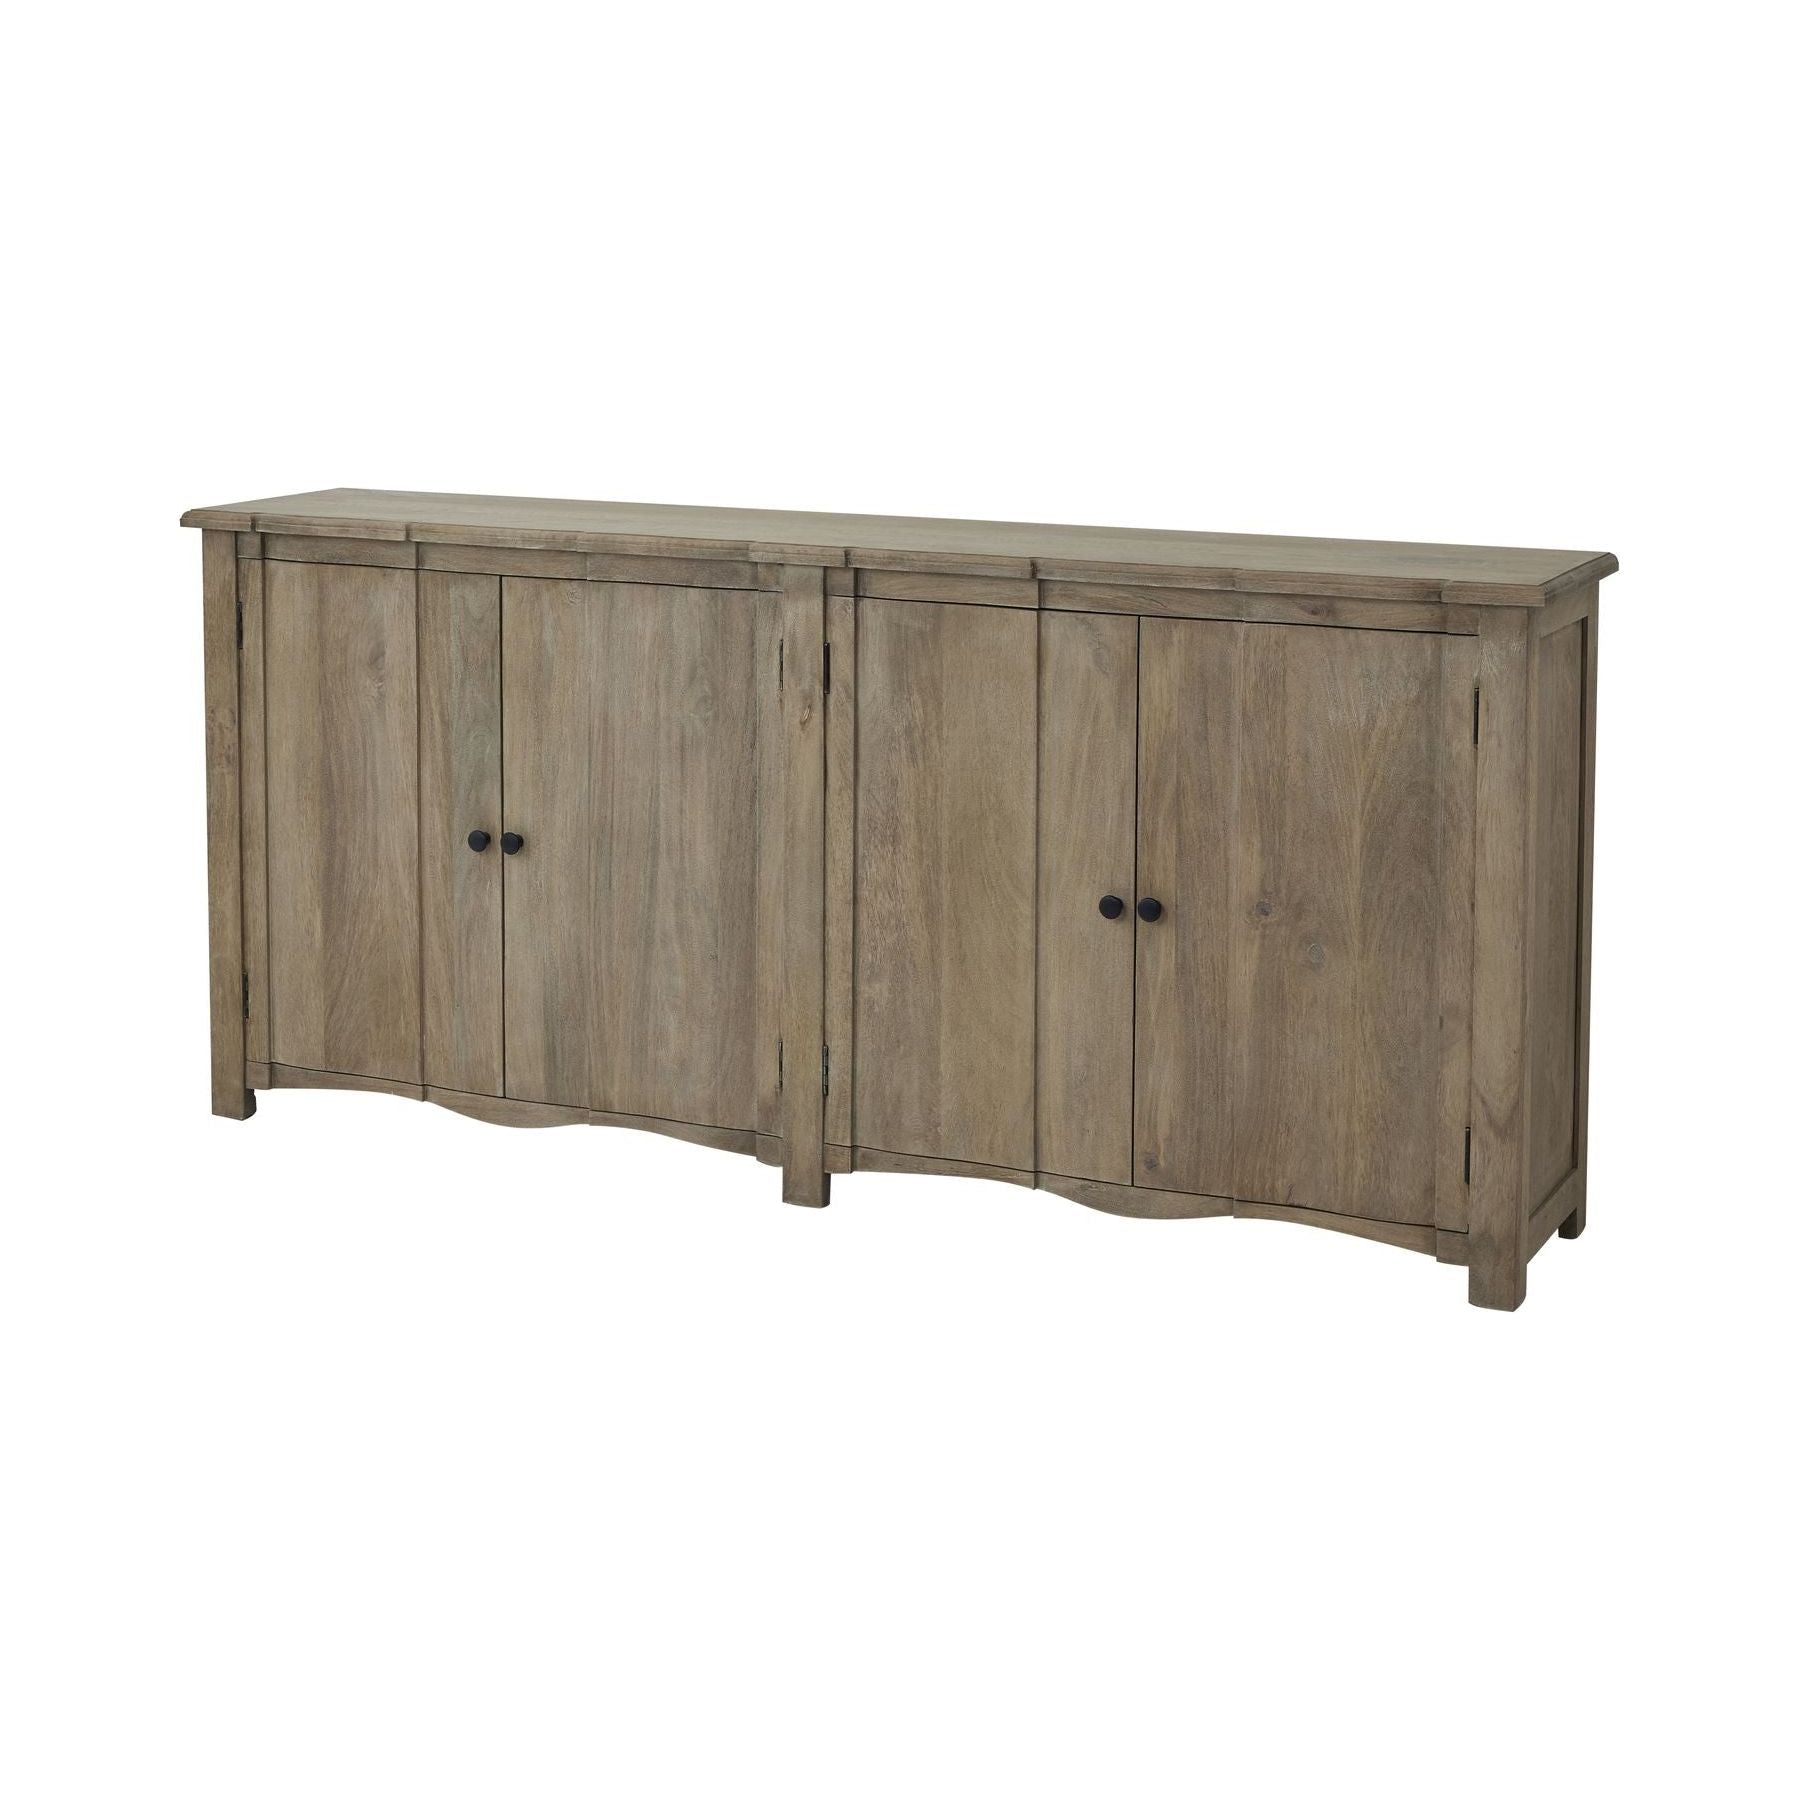 Copgrove Collection 4 Door Sideboard - Ashton and Finch